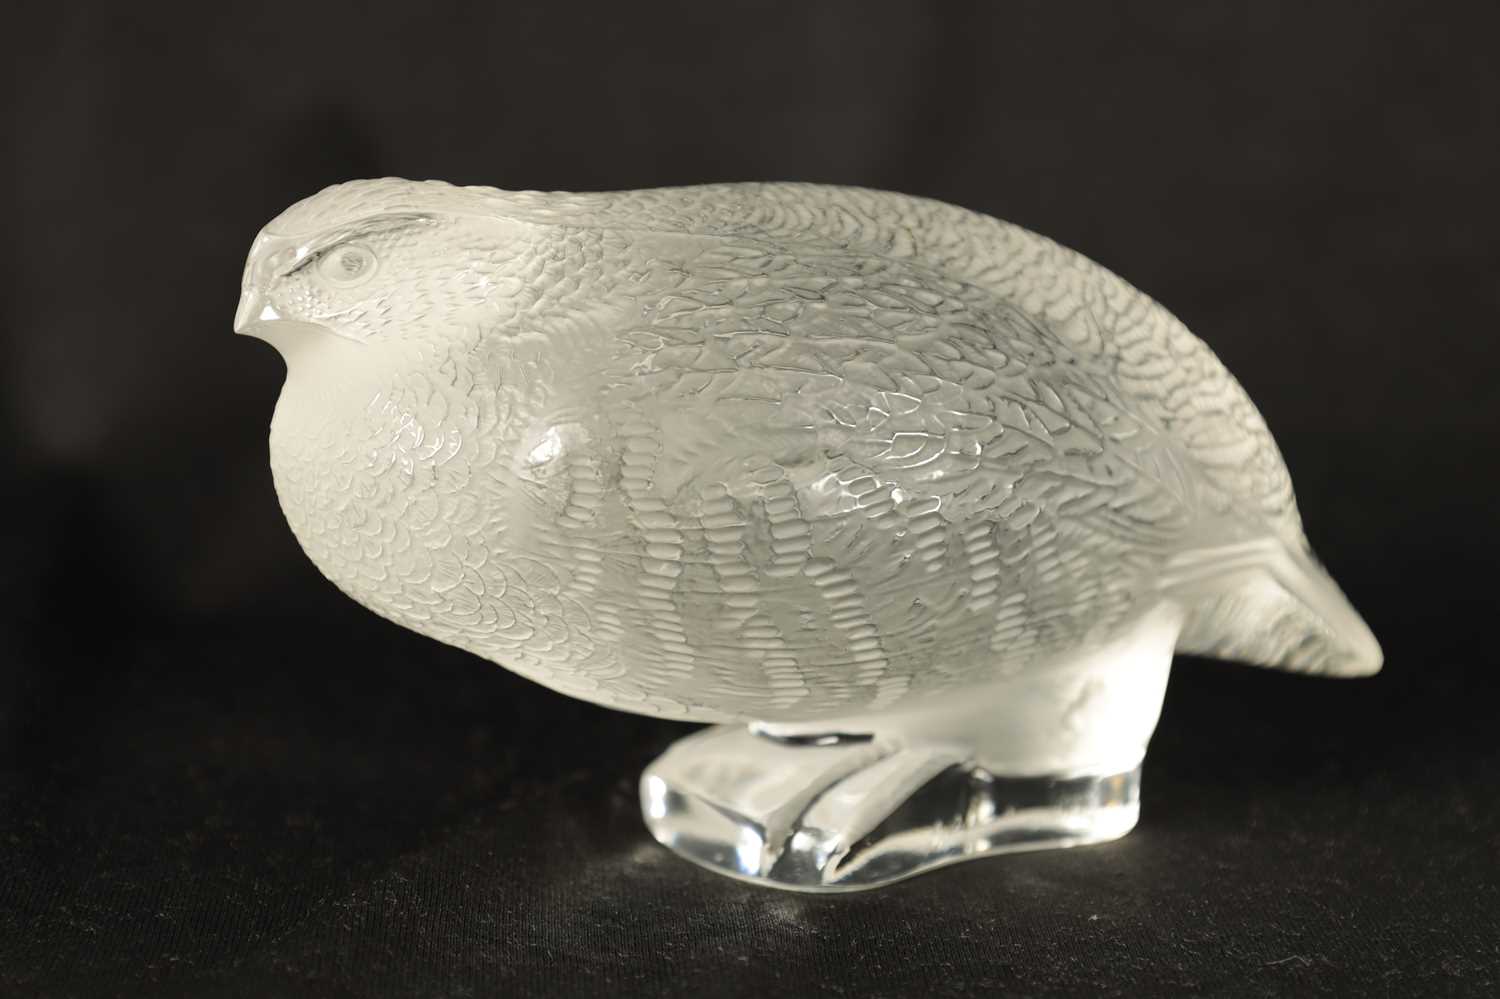 A LALIQUE FRANCE FROSTED GLASS BIRD SCULPTURE - Image 4 of 10